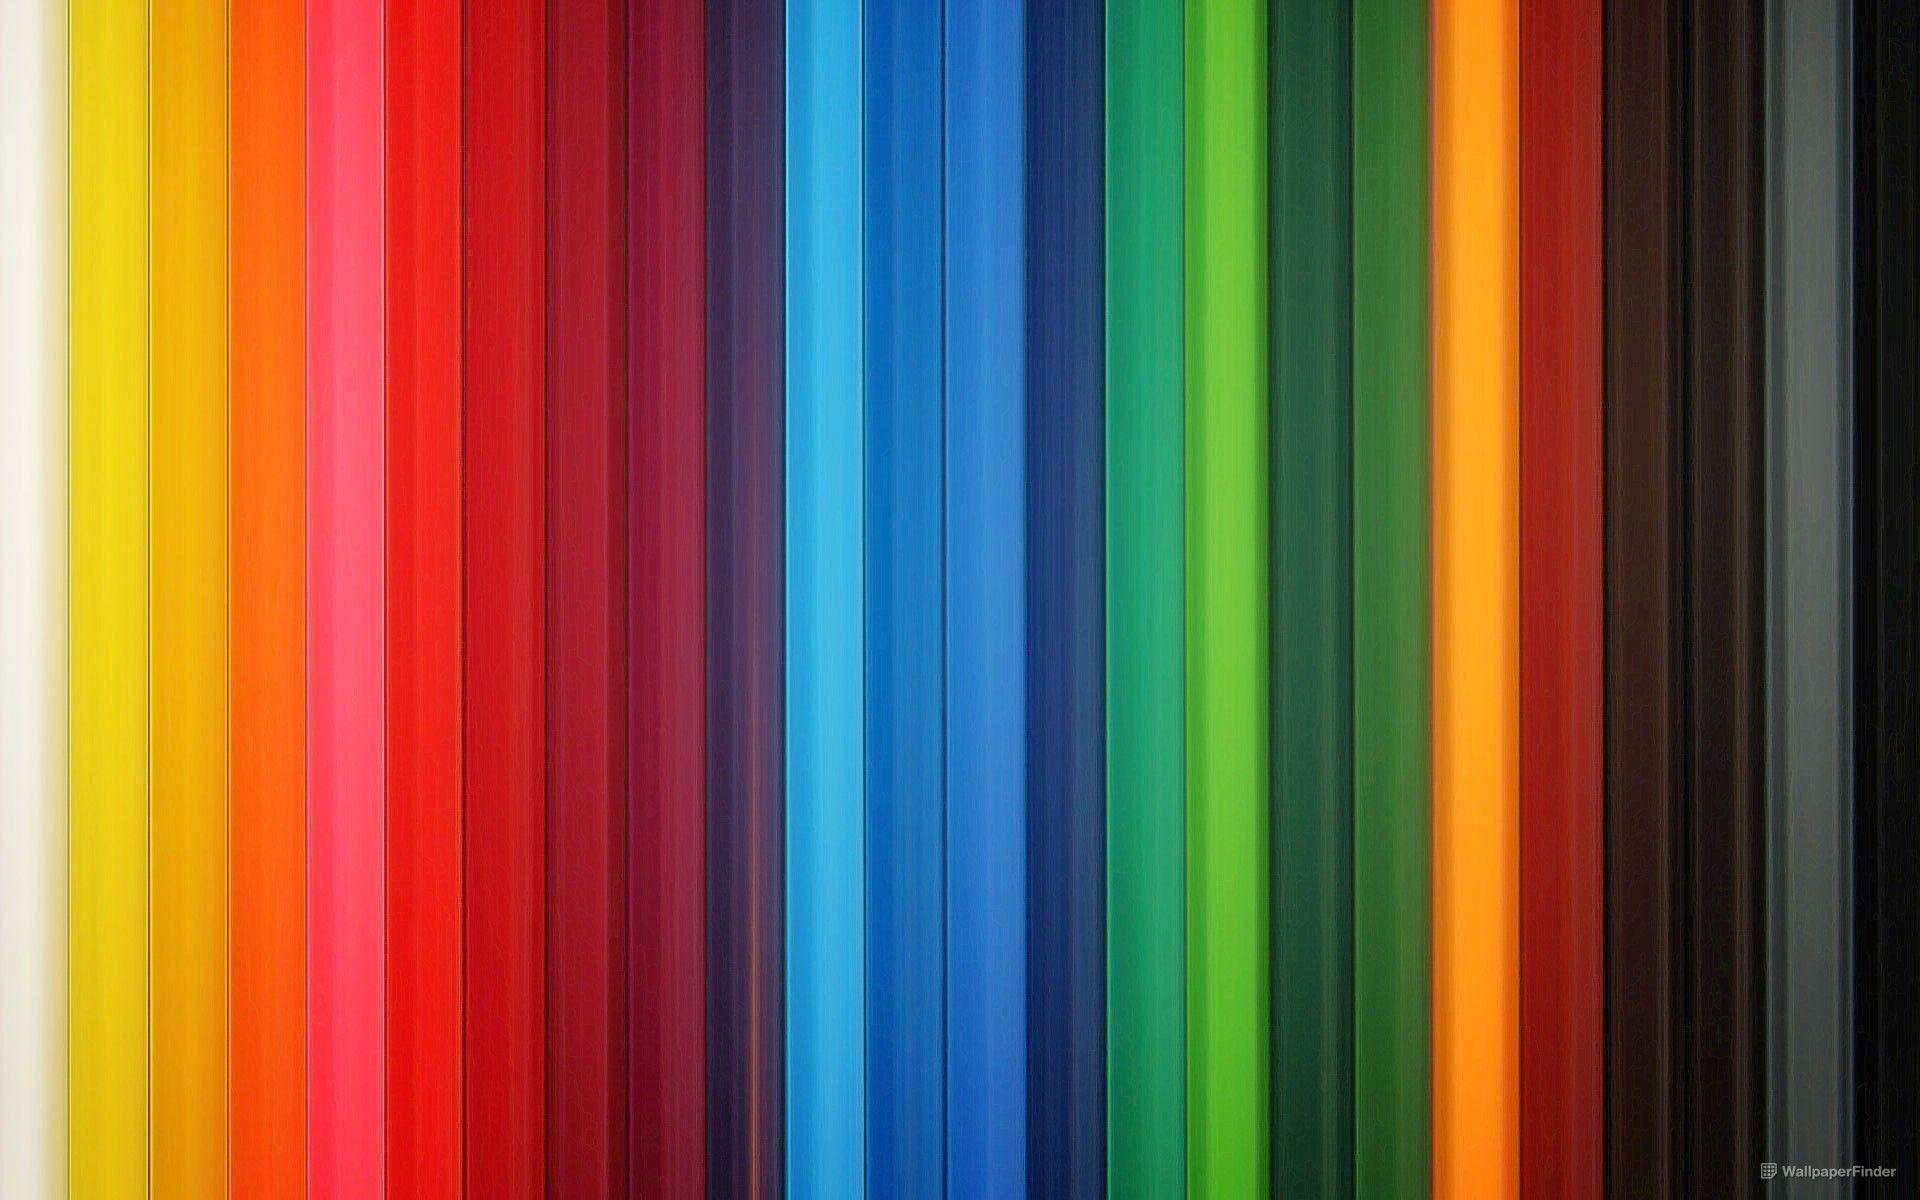 Wallpaper loaded with color